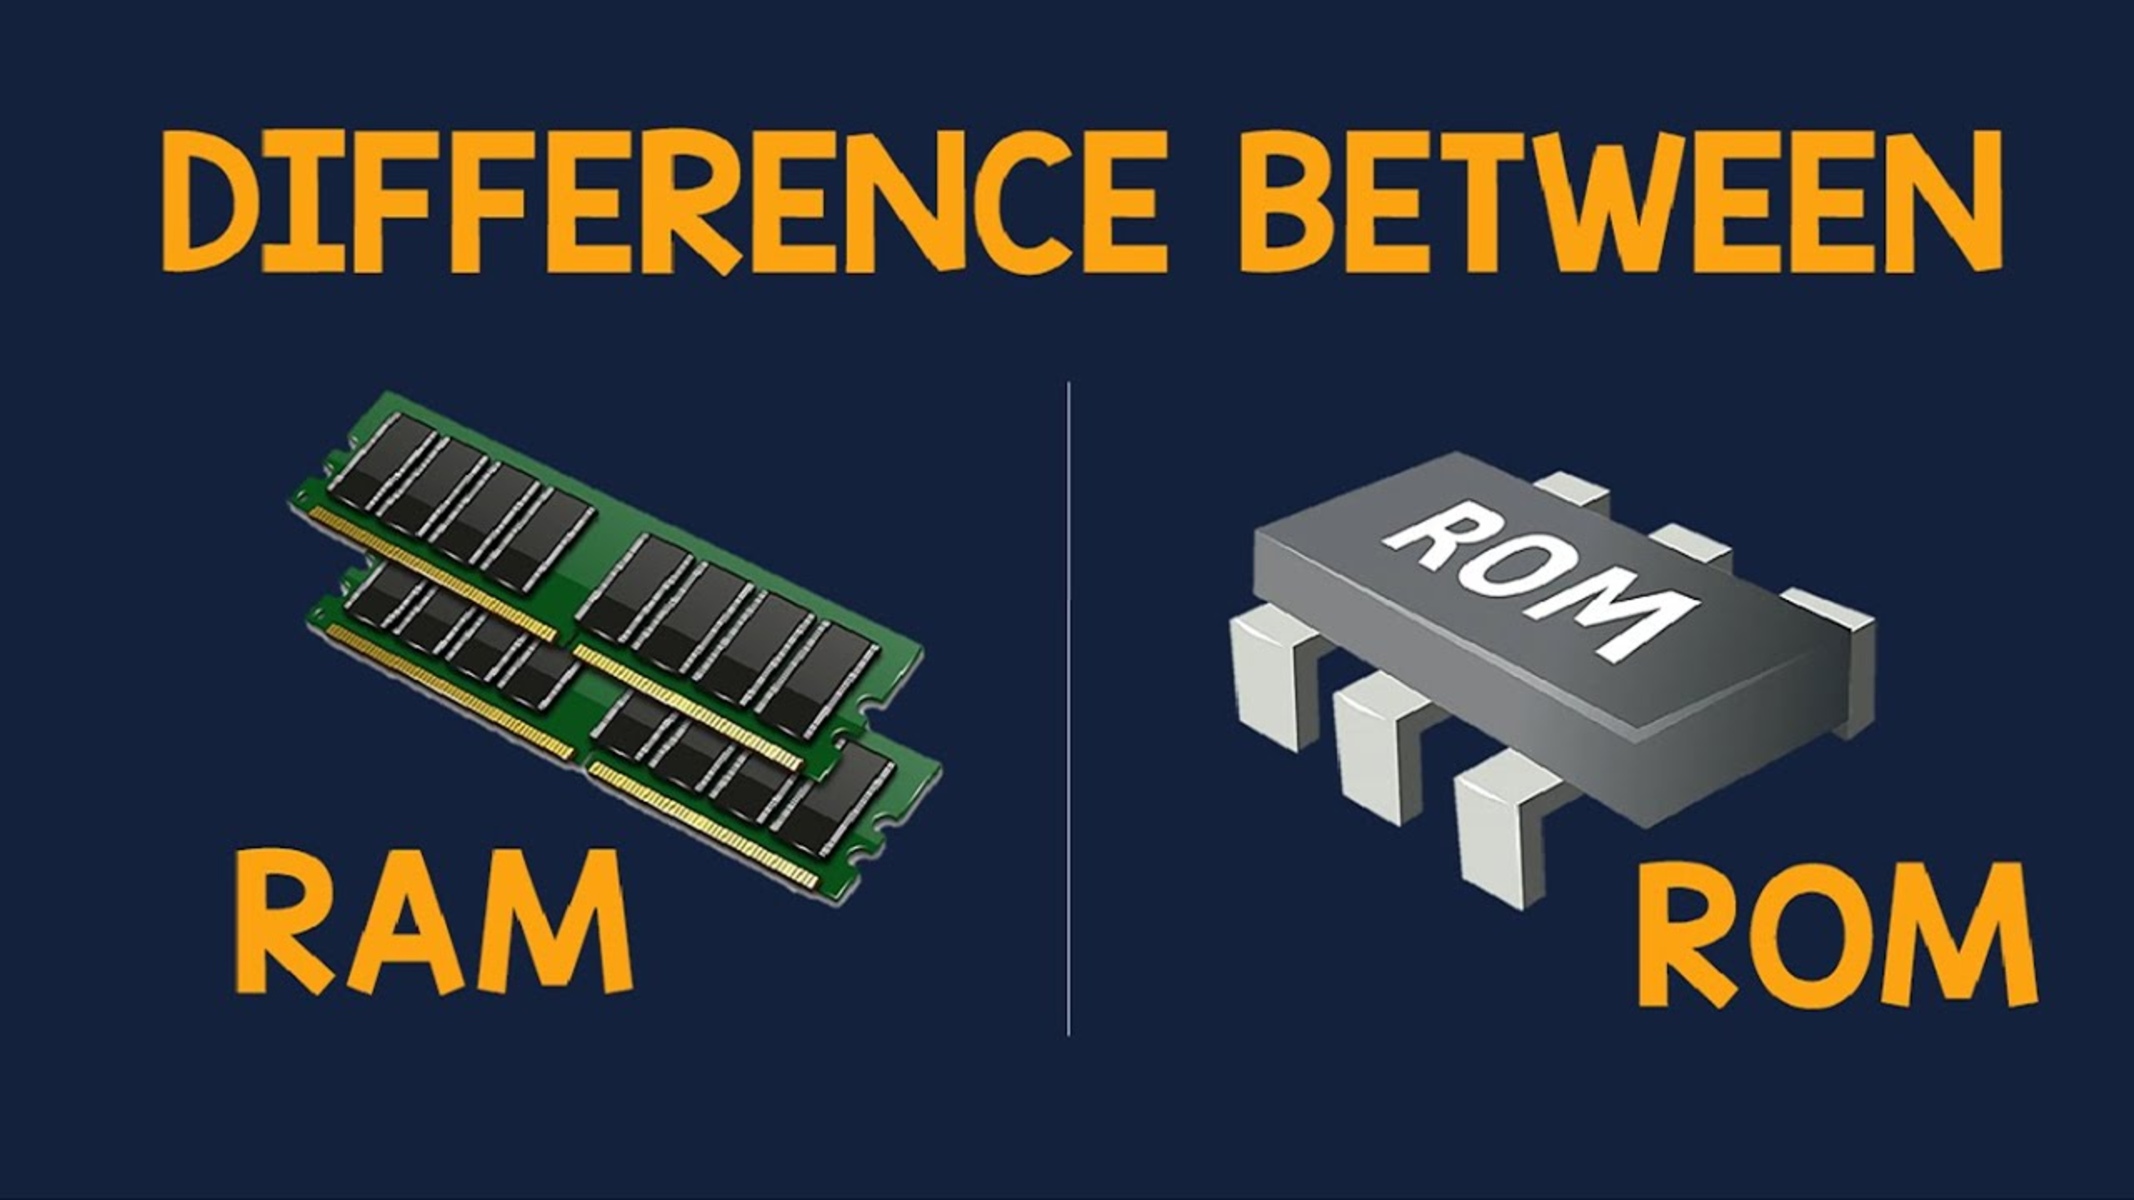 What Is The Difference Between RAM And ROM?